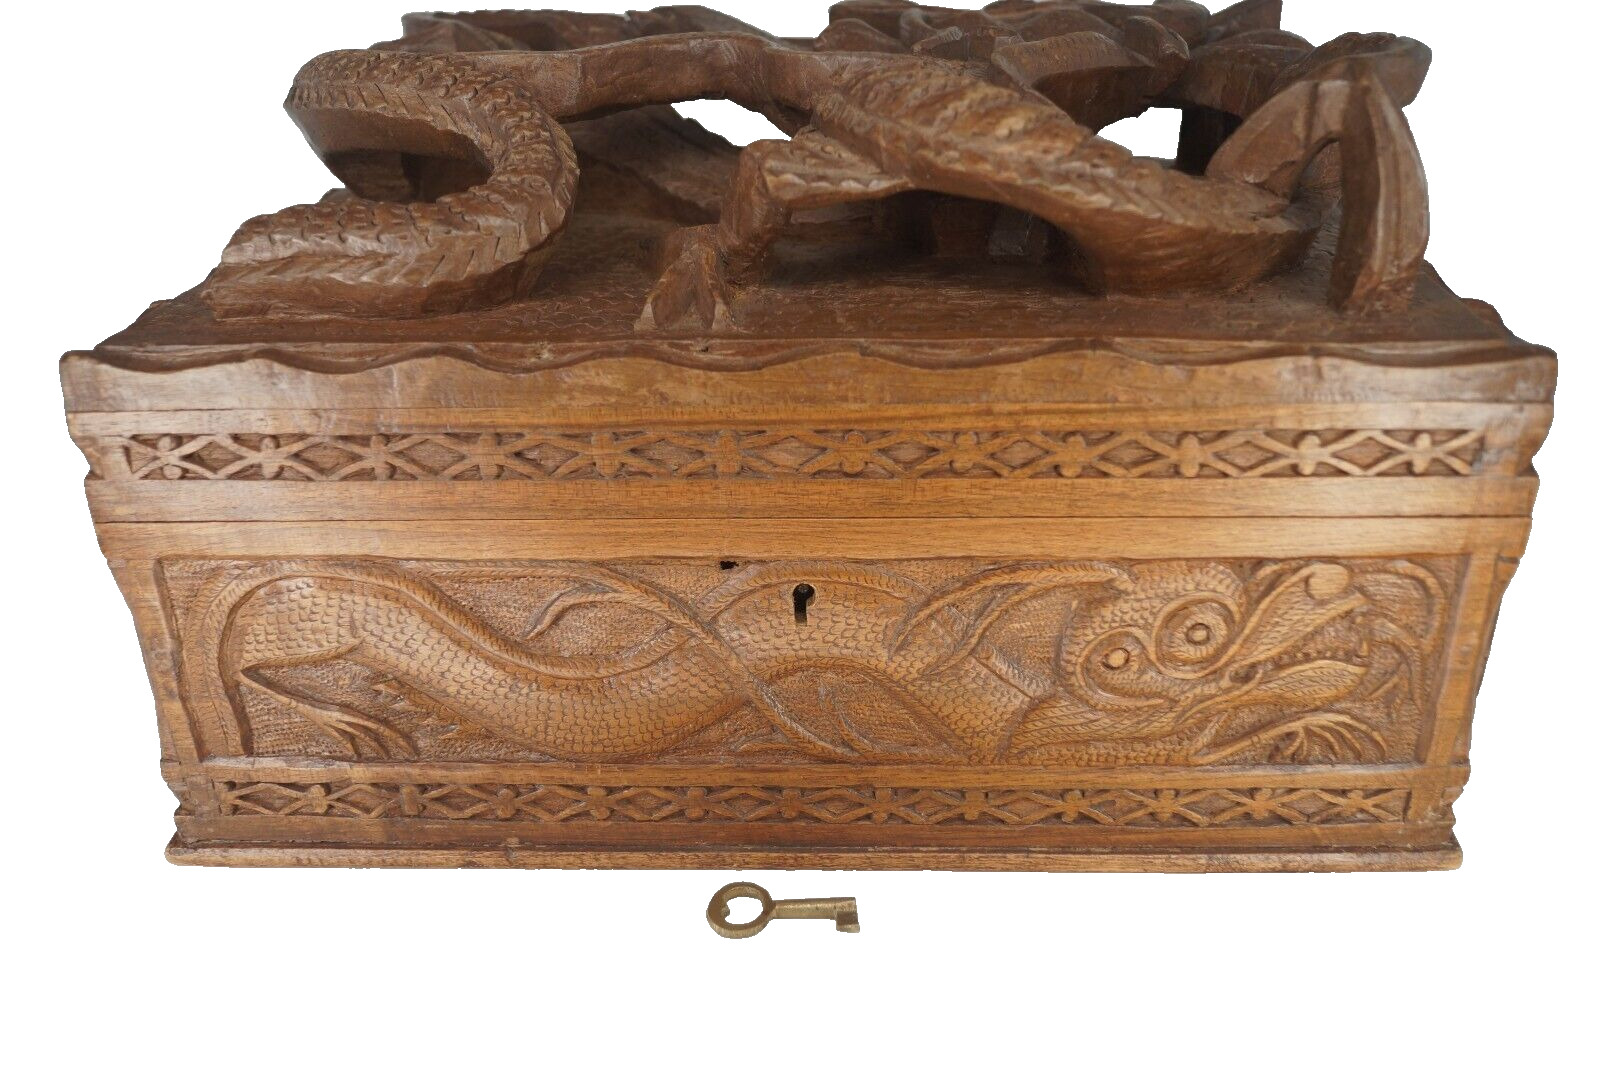 Hand Carved Wood Super Deep Relief Intricate Dragon Design Box with Lock & Key